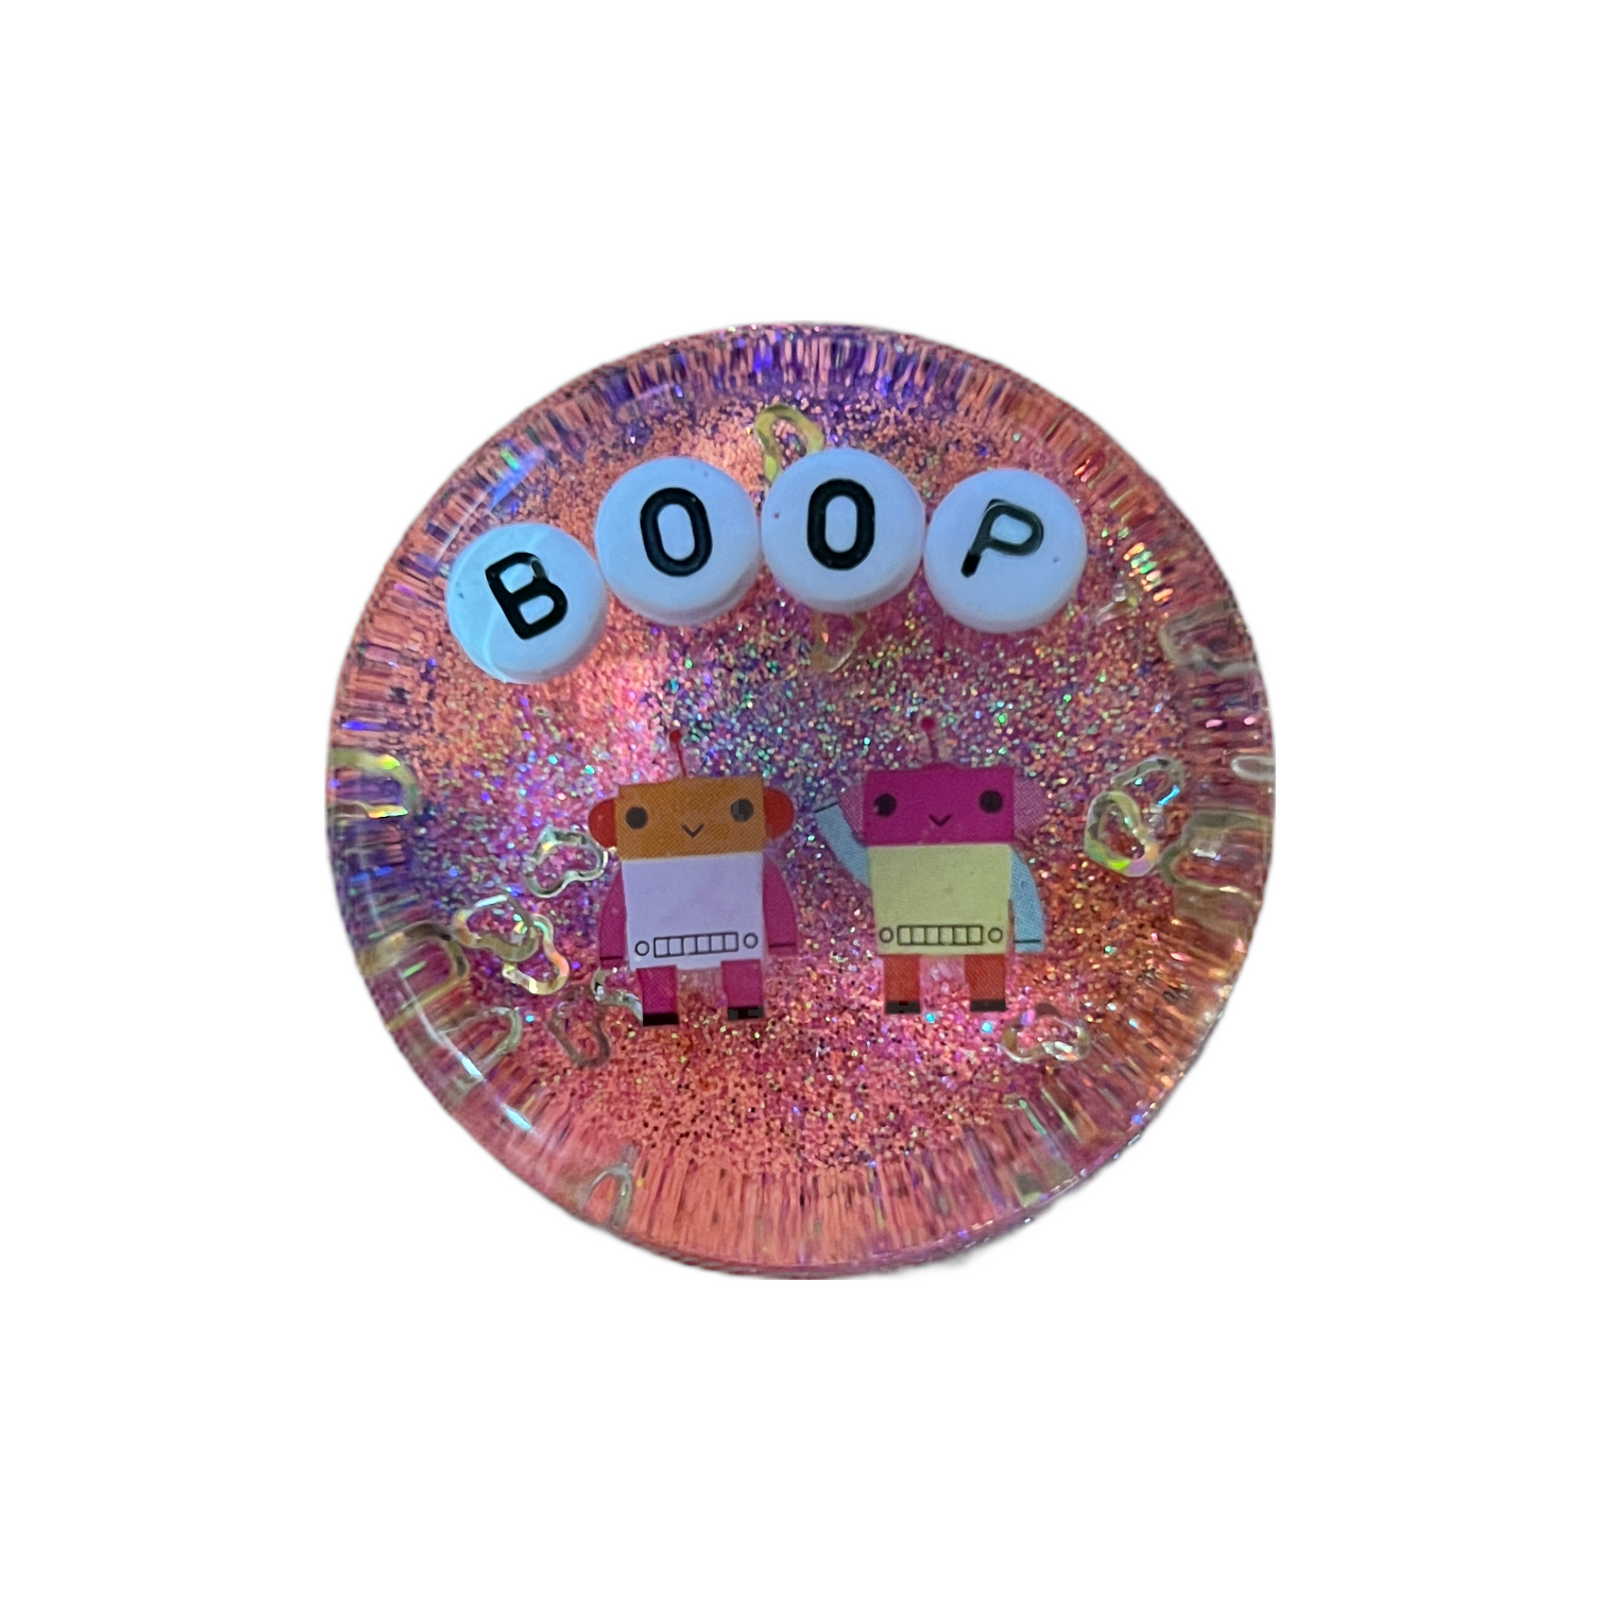 Boop - Shower Art - READY TO SHIP